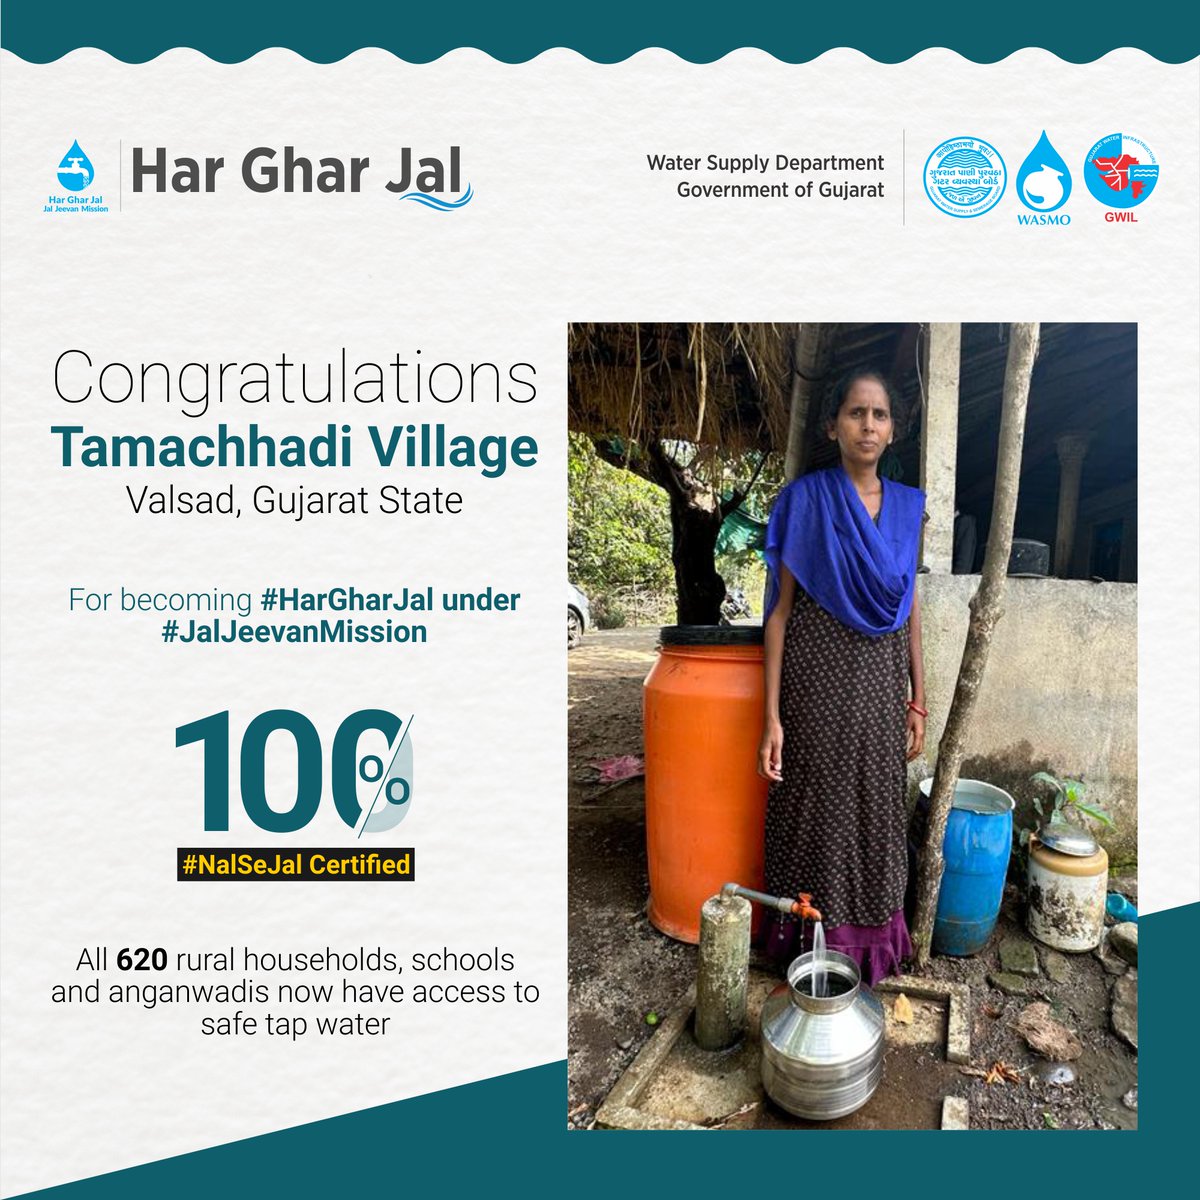 Congratulations to all the people of Tamachhadi Village of #Valsad, #Gujarat State, for becoming 100% #HarGharNalSeJal certified. All 620 rural households, schools and anganwadis are now getting safe tap water under #JalJeevanMission